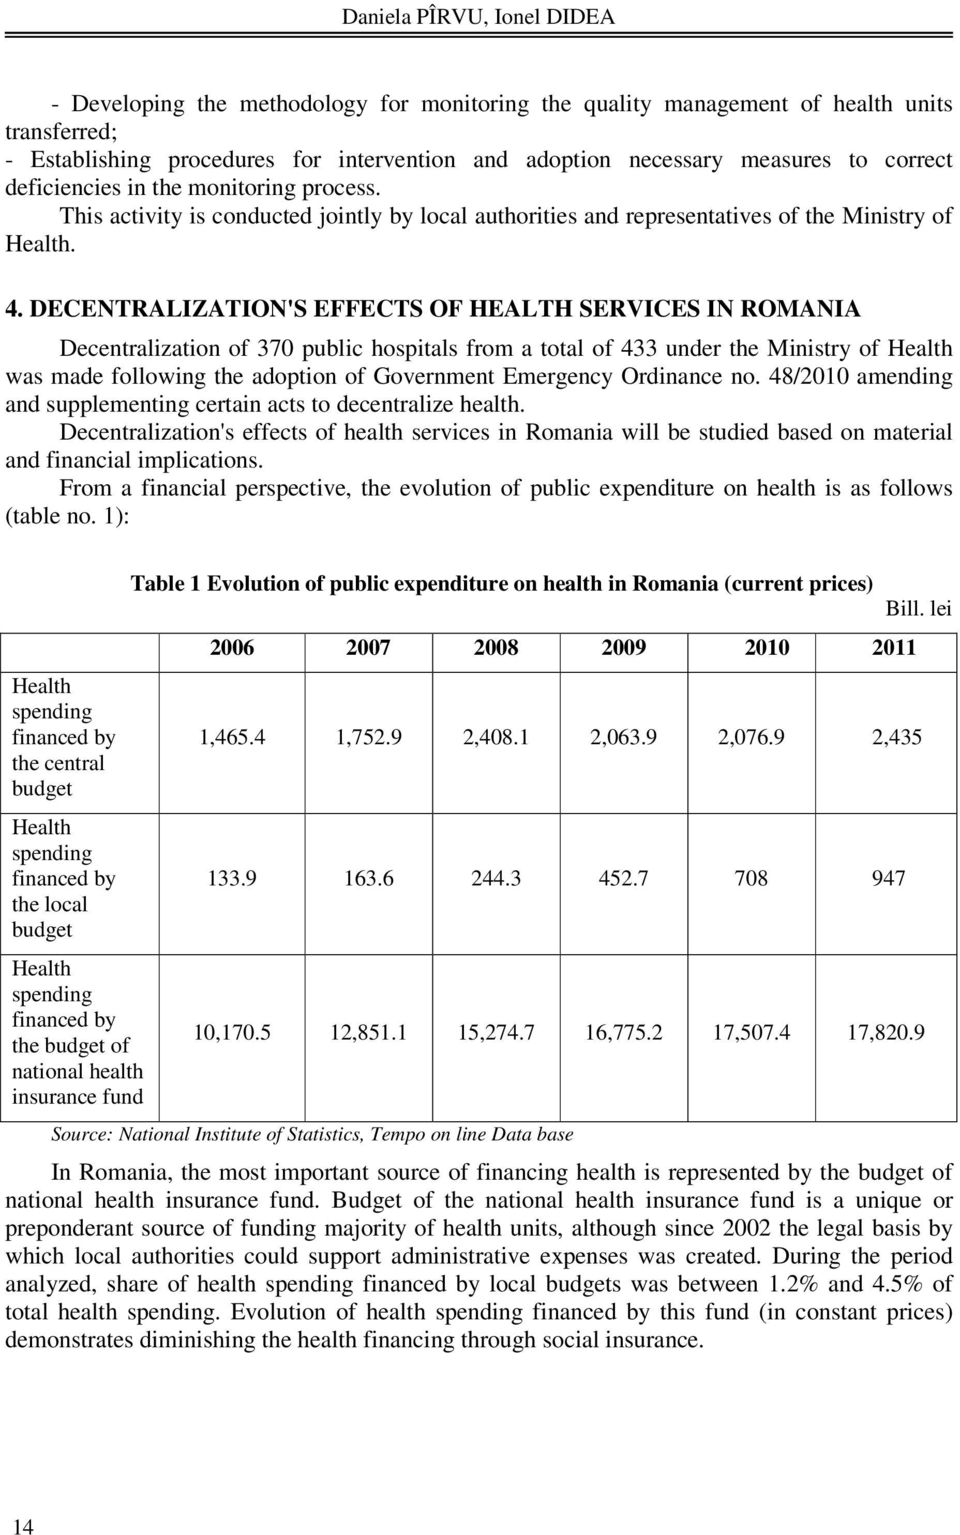 DECENTRALIZATION'S EFFECTS OF HEALTH SERVICES IN ROMANIA Decentralization of 370 public hospitals from a total of 433 under the Ministry of Health was made following the adoption of Government